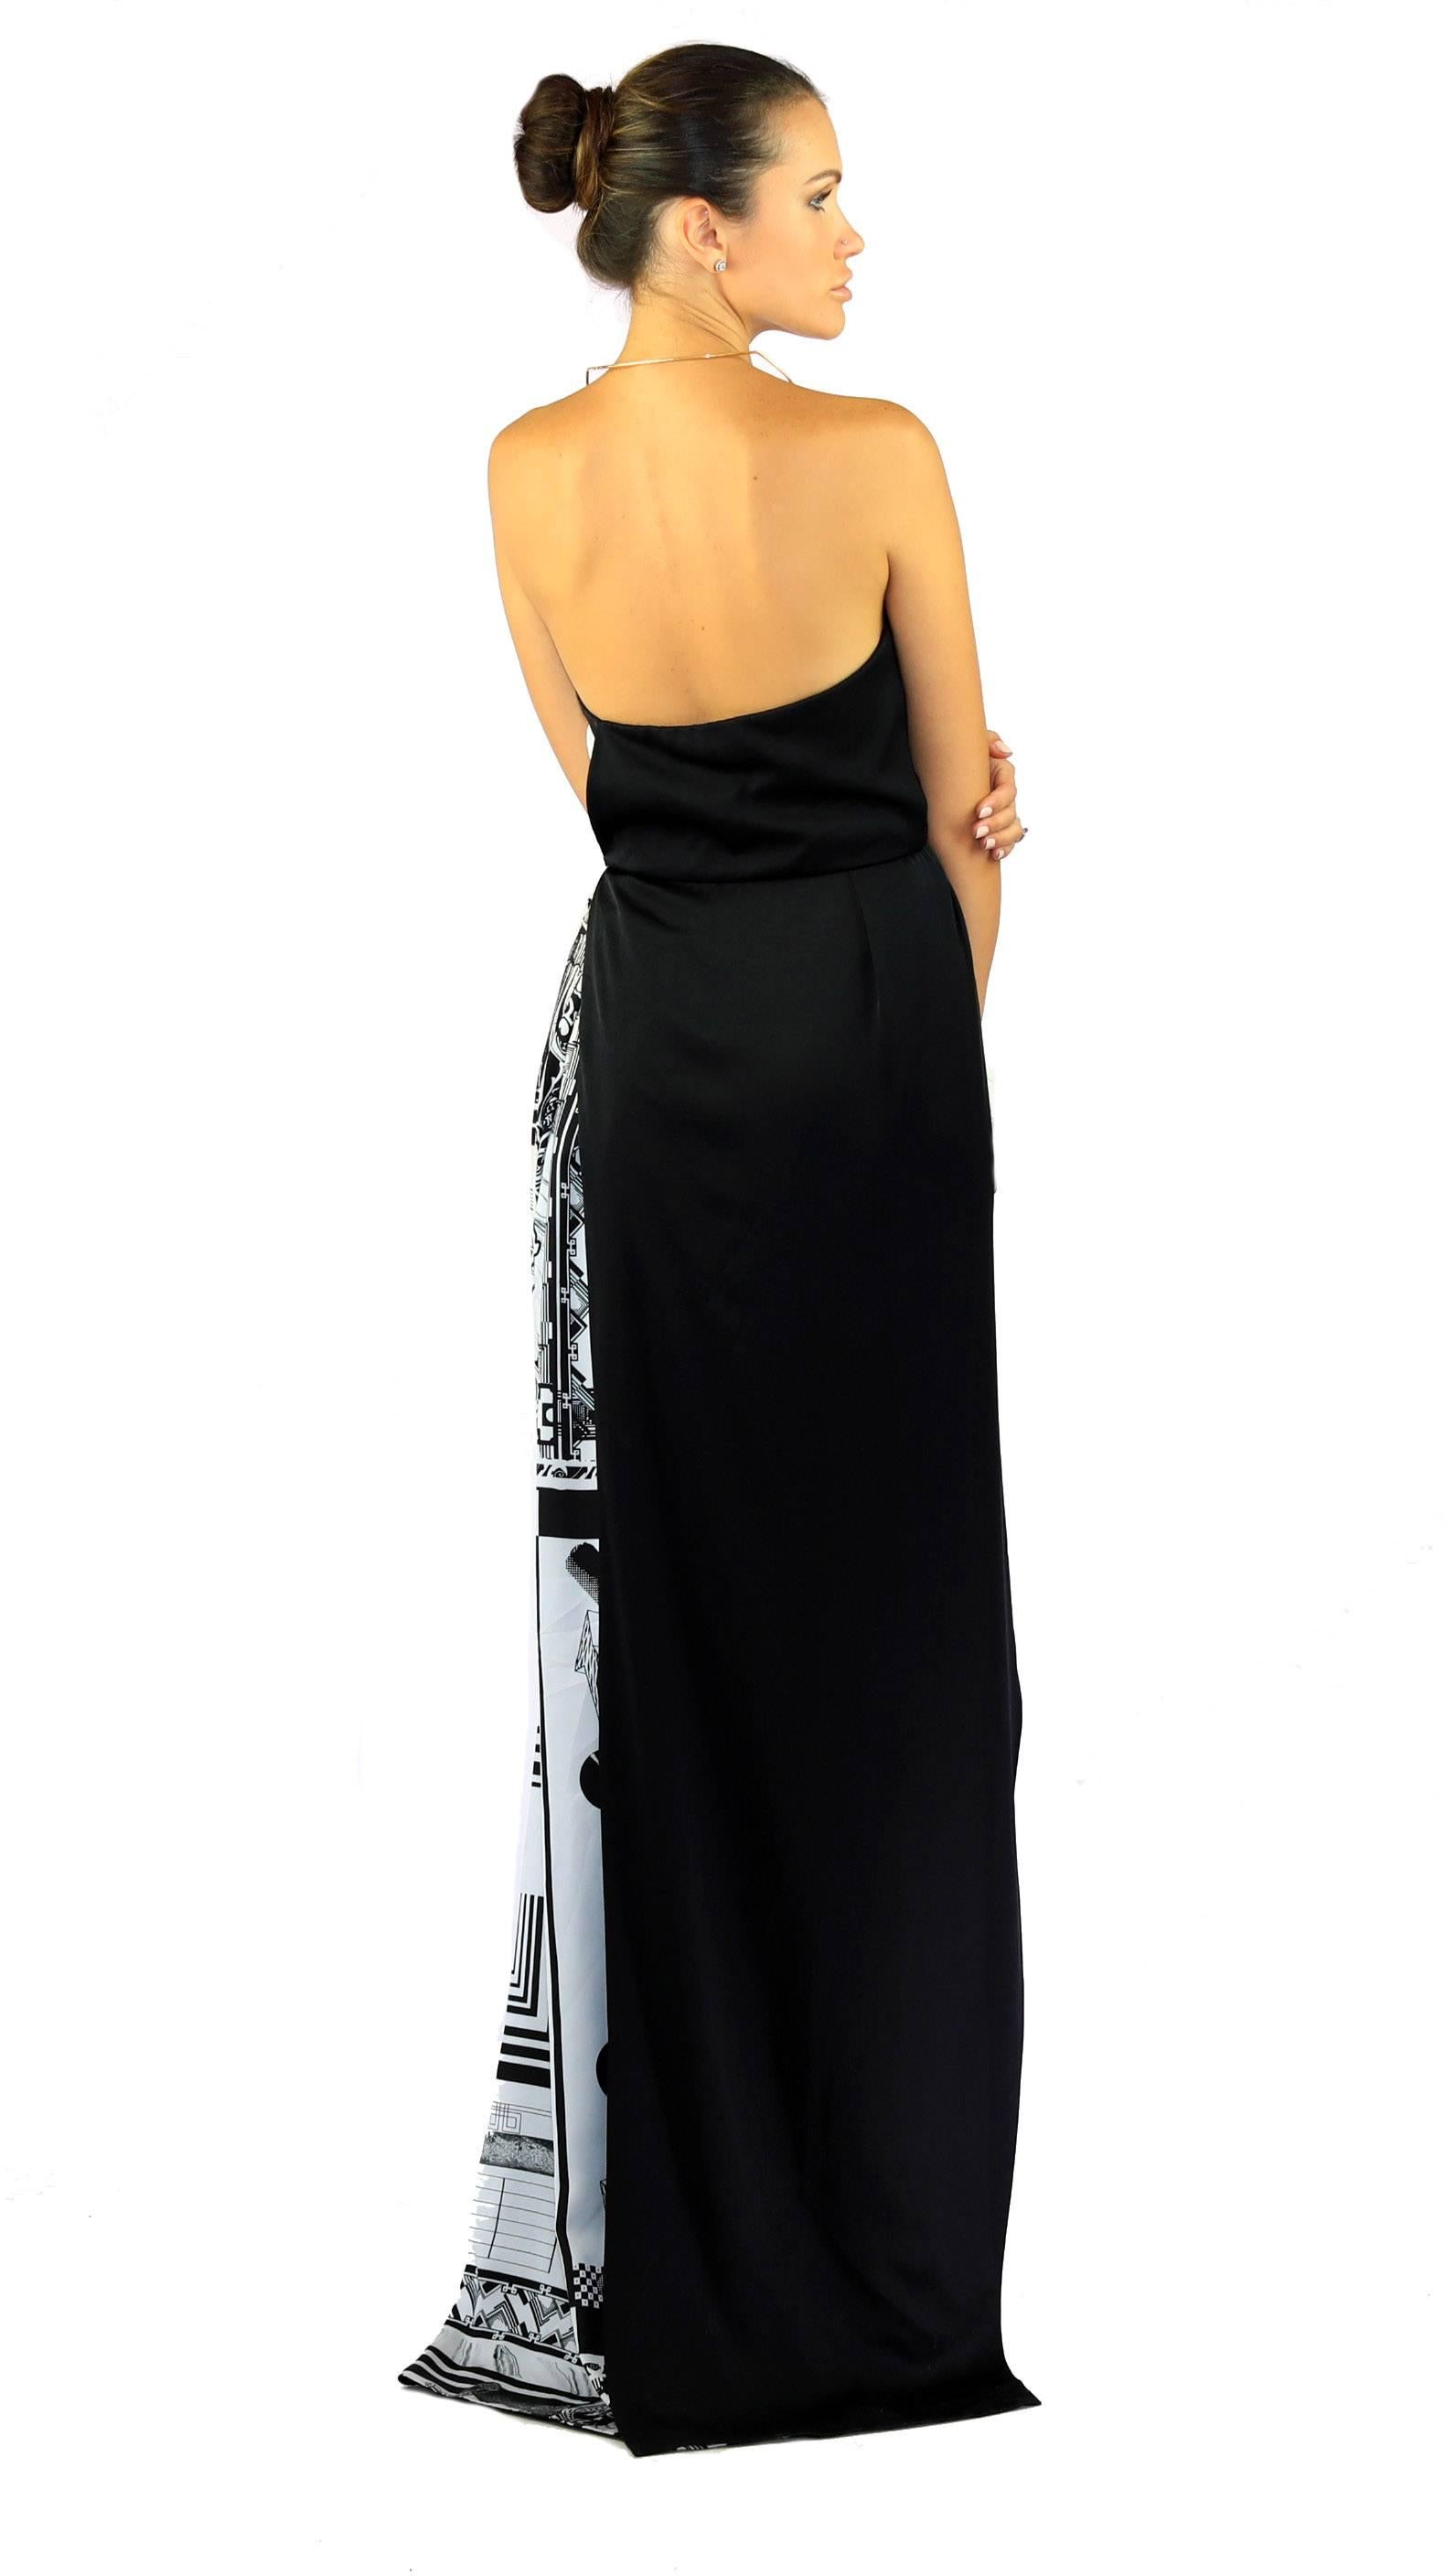 Women's Versace VERSUS + Anthony Vaccarello iconic print maxi dress 38 - 2, 42 - 6 For Sale